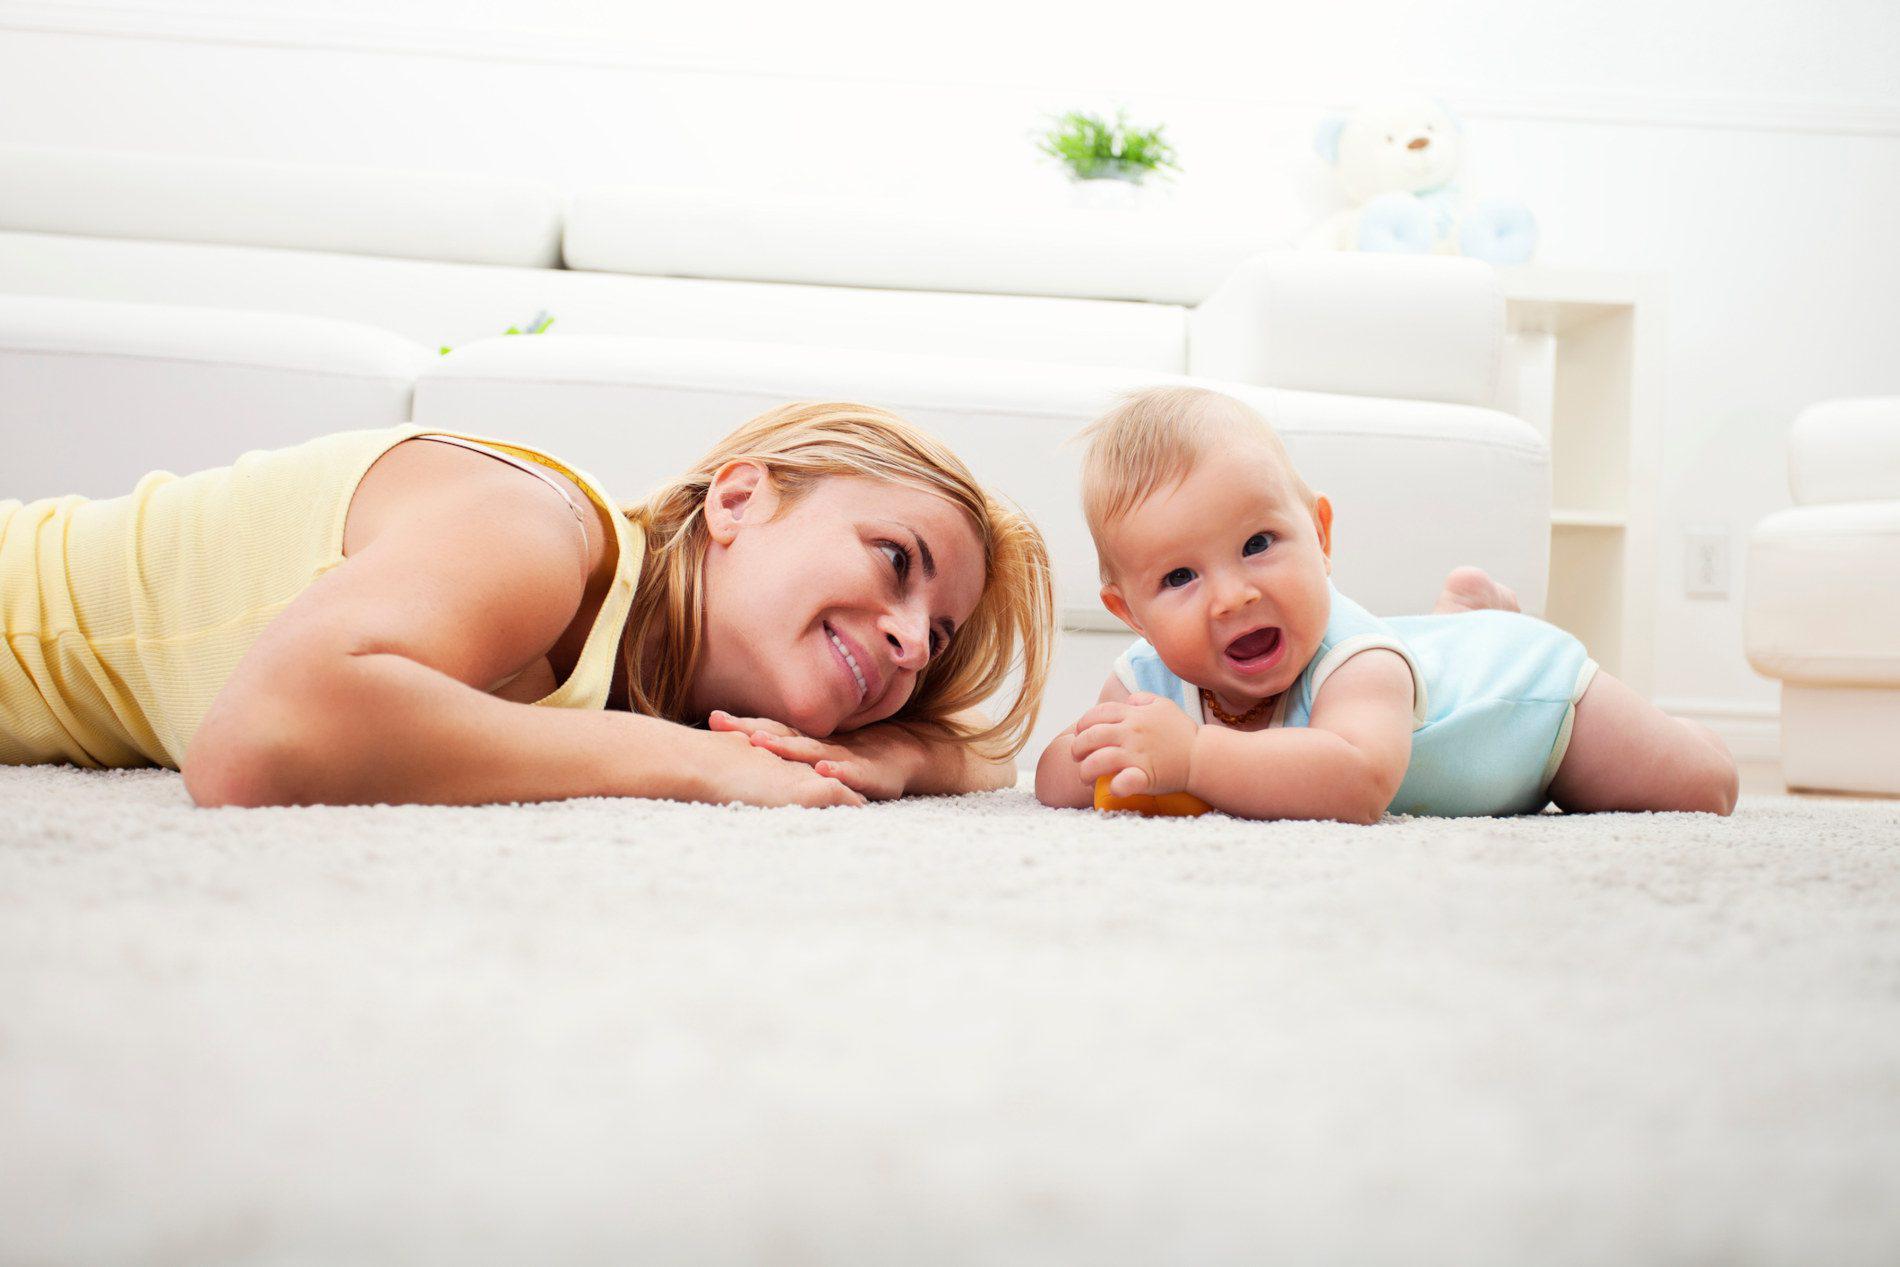 Restore your home’s carpets and eliminate tough stains with our powerful carpet cleaning solutions.